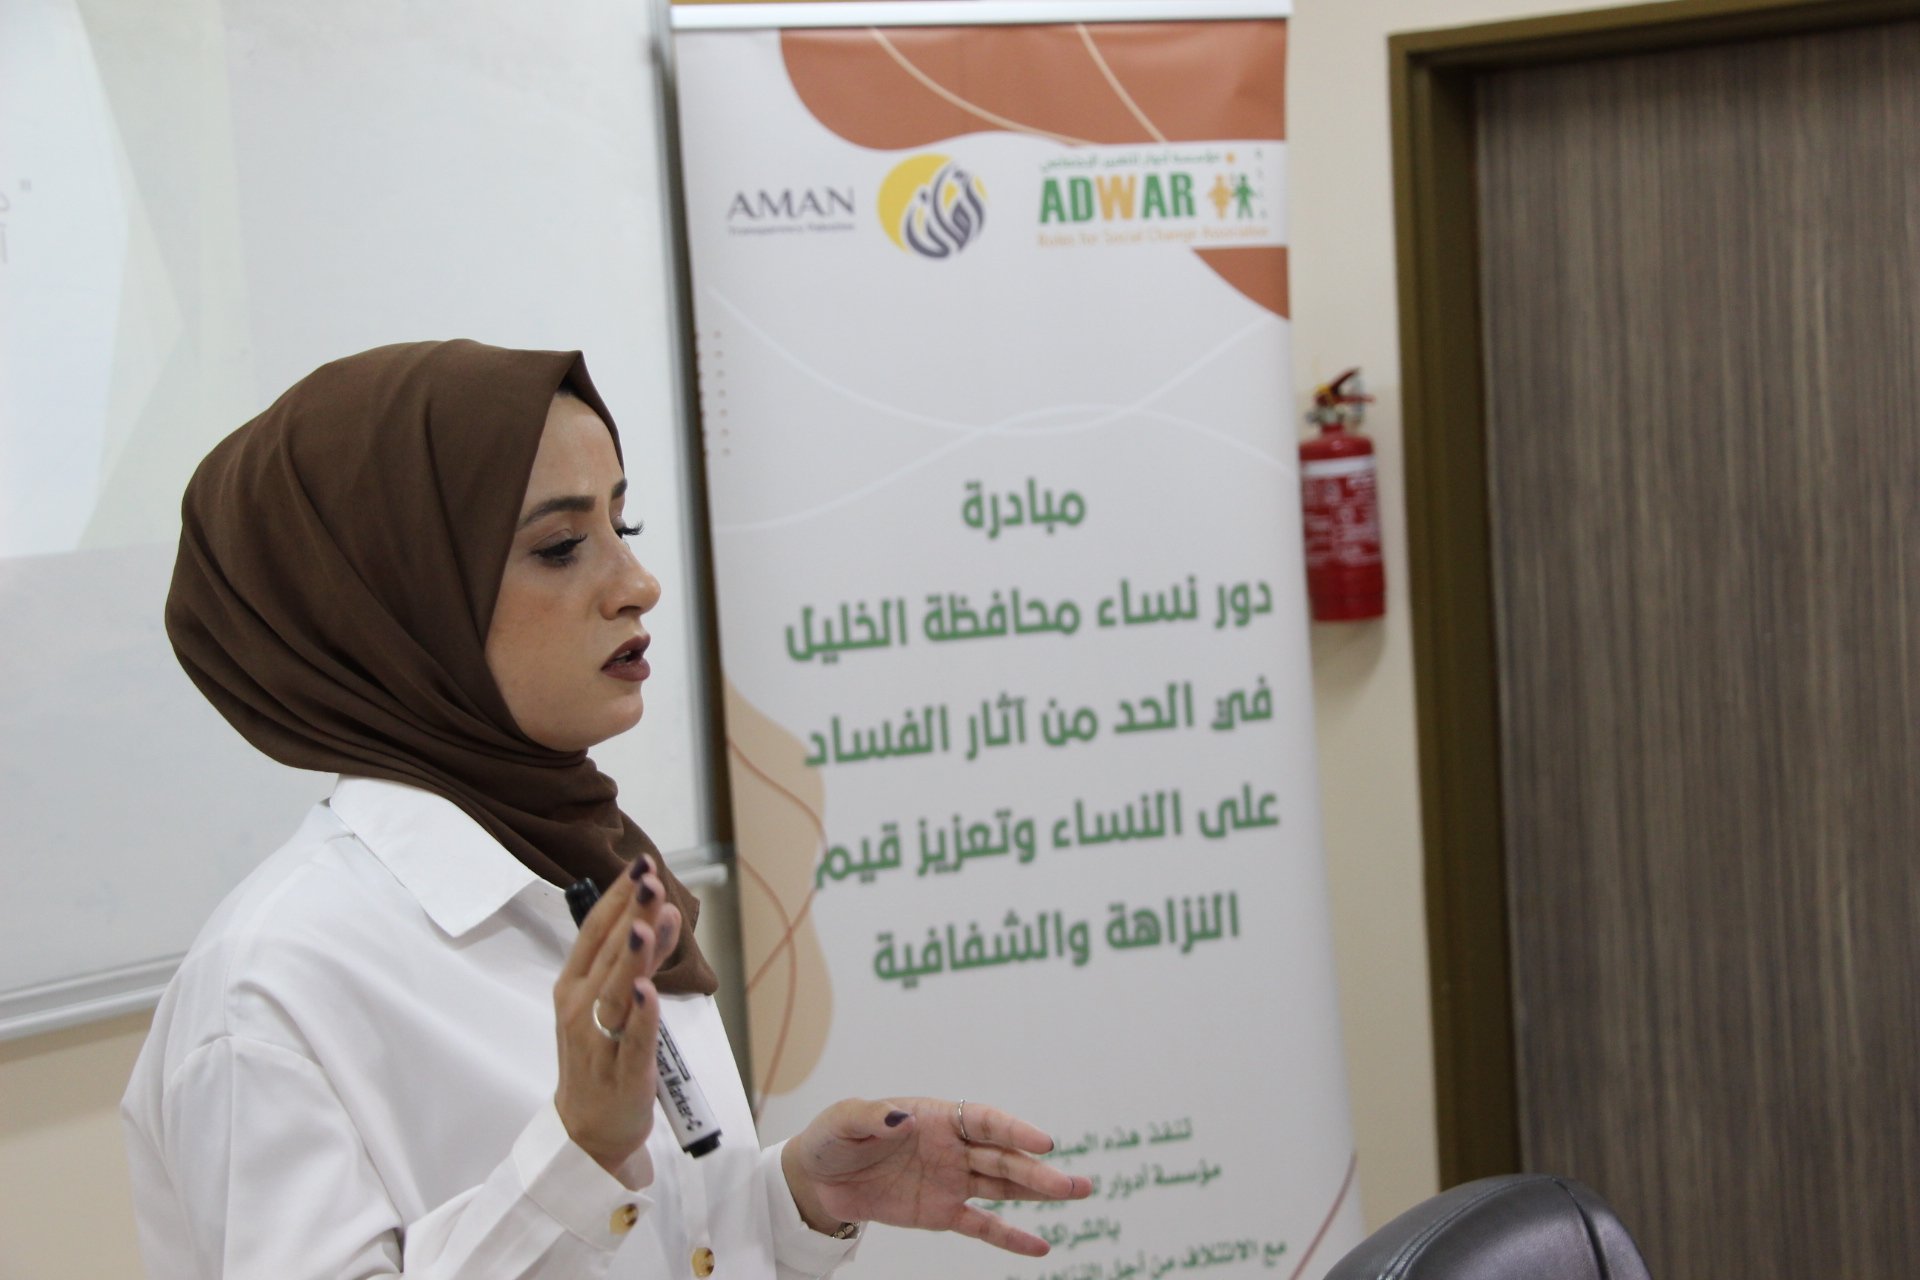  Awareness-raising meeting on the impact corruption on women in cooperation with Palestine Technical University/Al-Arroub